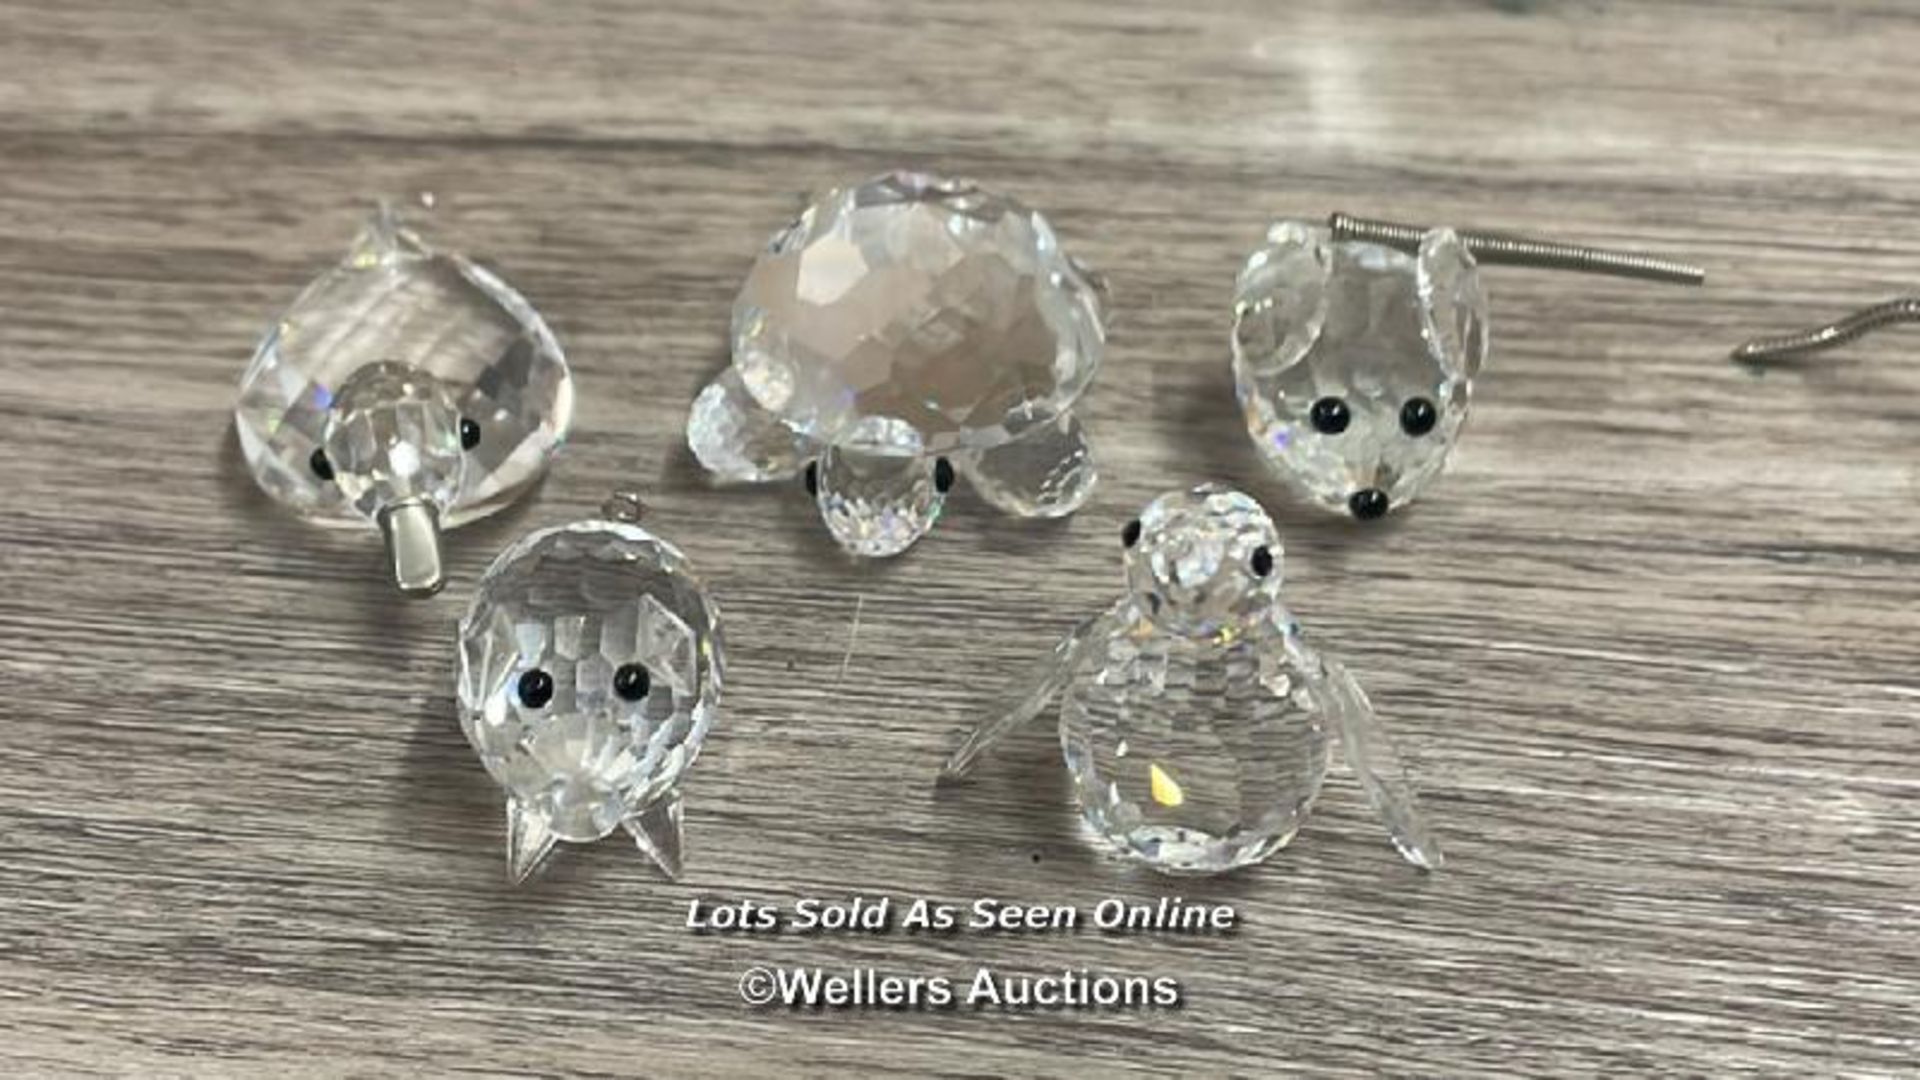 NINE CHRISTAL ANIMALS MARKED SWAROVSKY WITH SIX MORE UNMARKED AND SMALL CHRYSTAL BALL (16) - Image 4 of 6